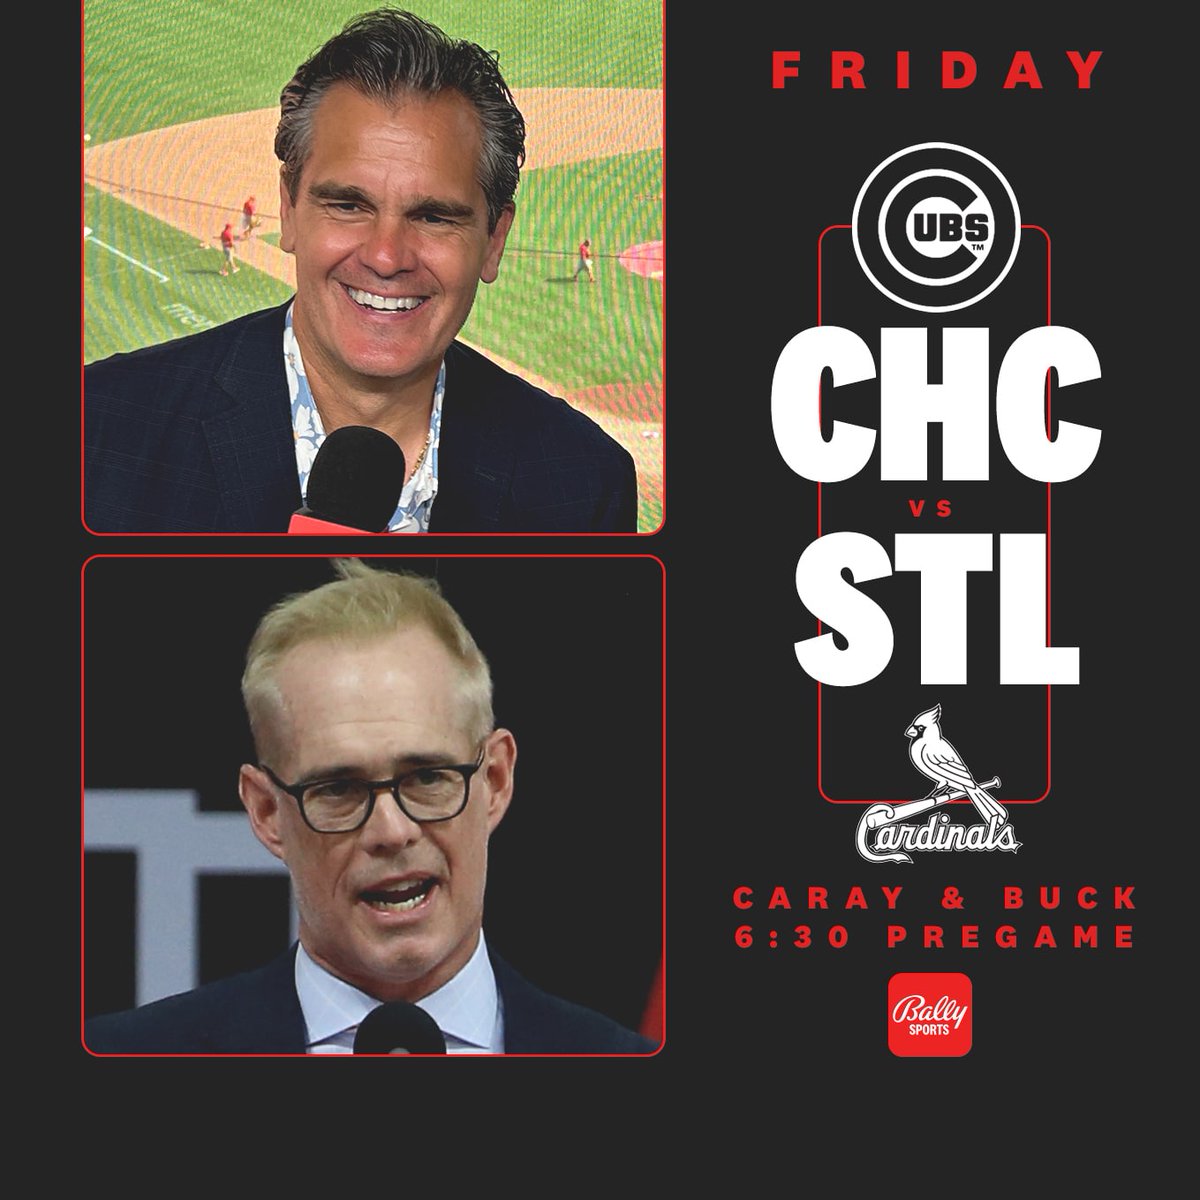 As we celebrate baseball's greatest rivalry, we'll pay tribute to two of the greatest families in the history of sports broadcasting as Joe Buck joins Chip Caray in the booth Friday night. #STLCards